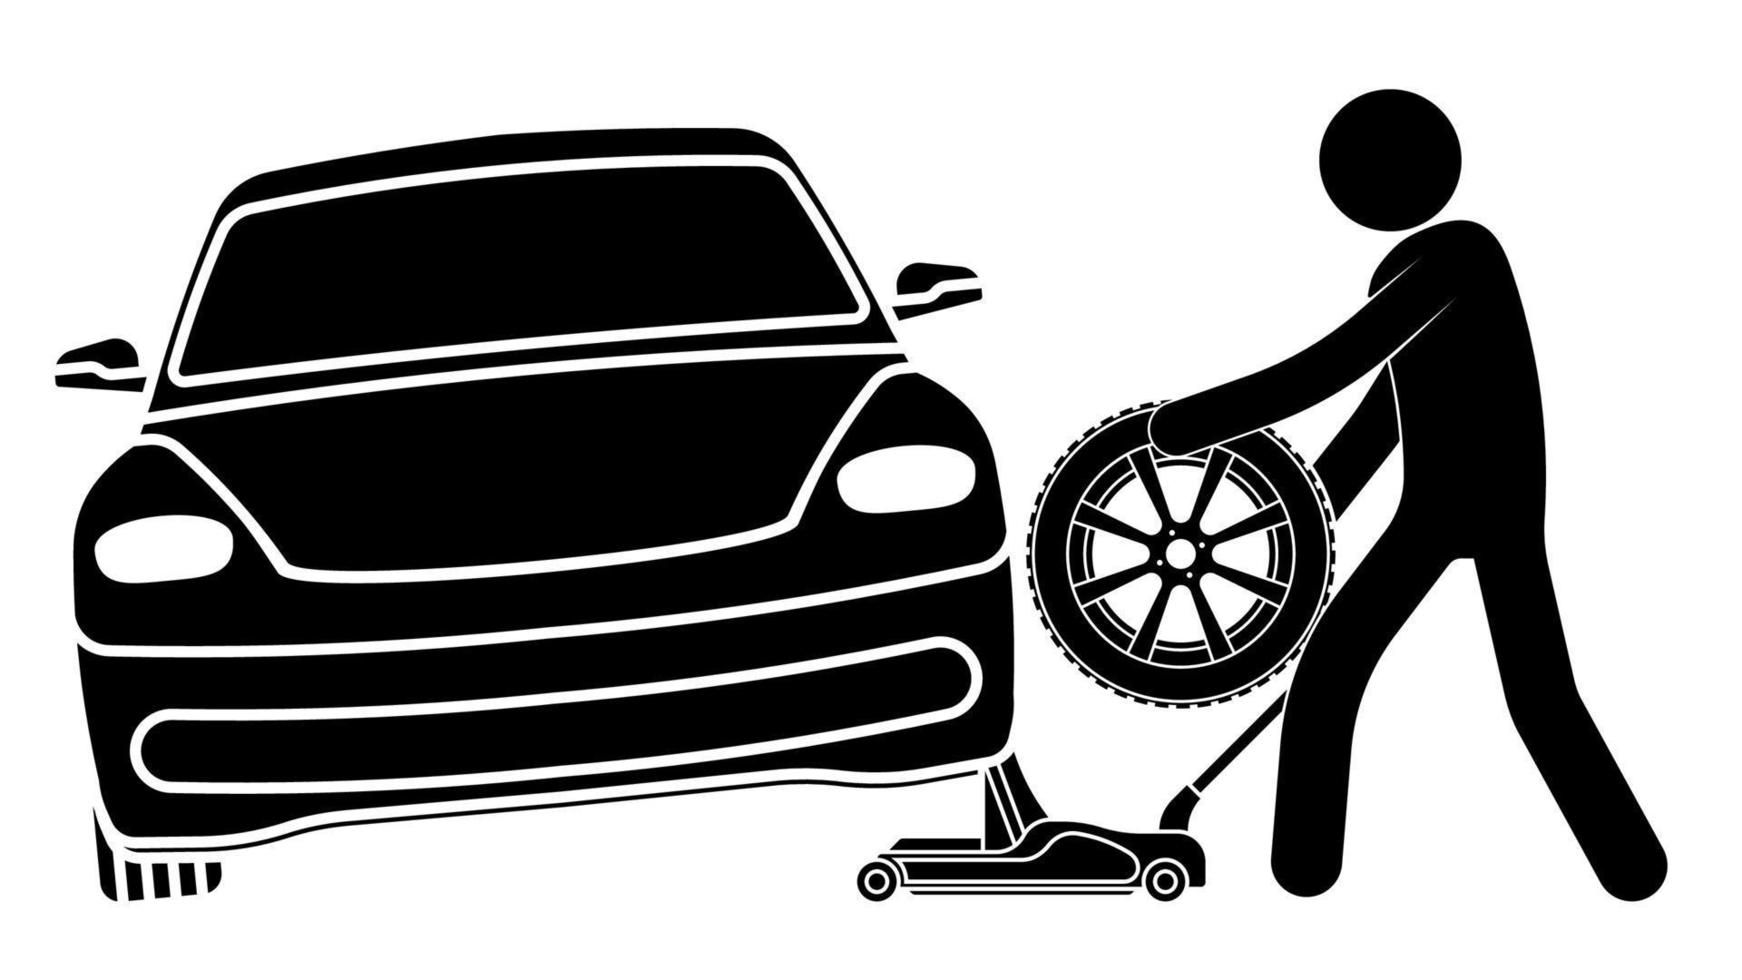 stick figure, workshop mechanic raised car on jack to change wheel. Lifting the car to change wheels before start of season. Black and white vector